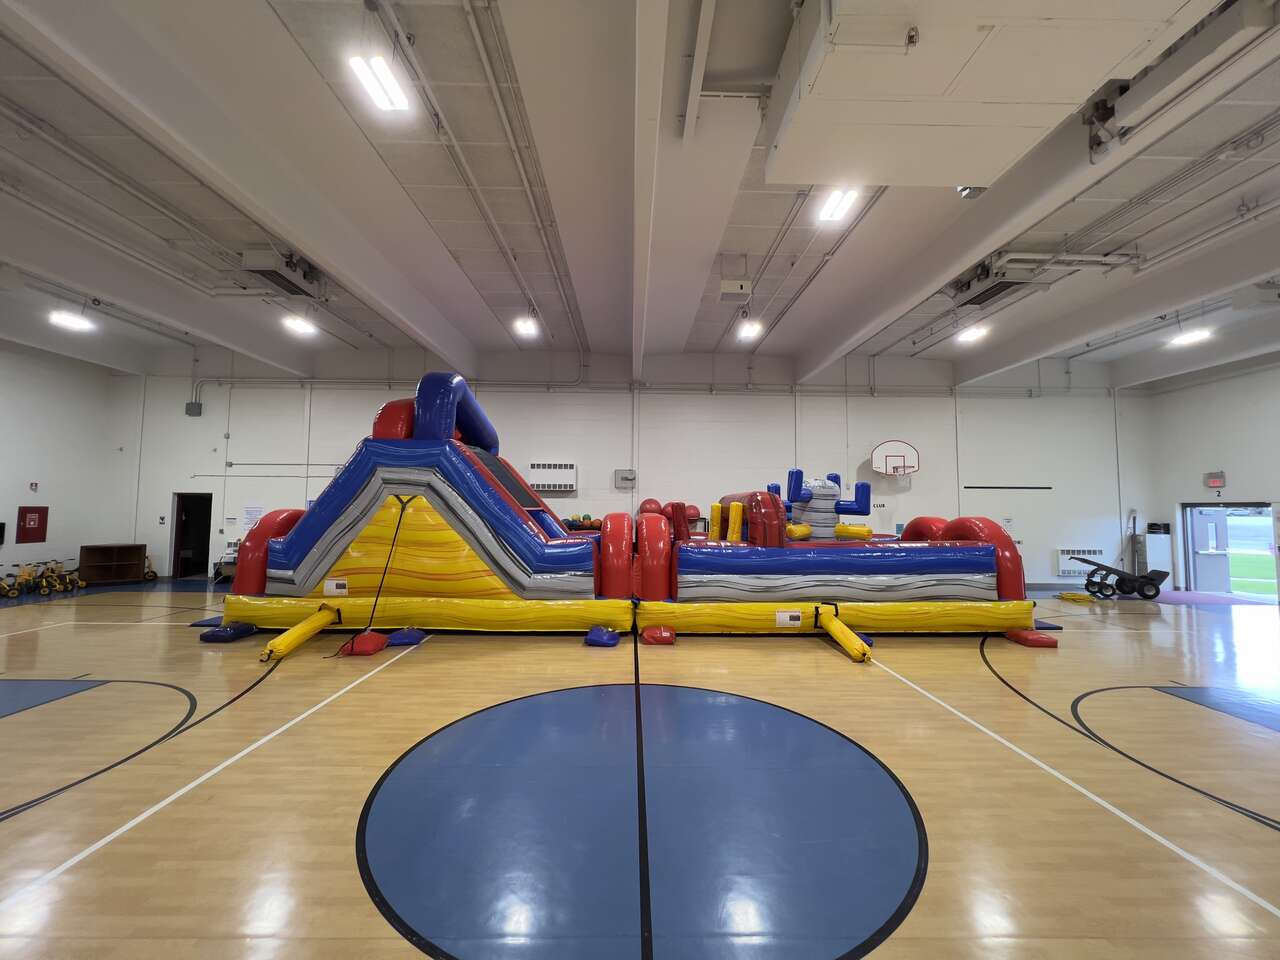 obstacle course rentals by Fun Bounces Rental in Westmont IL 60559